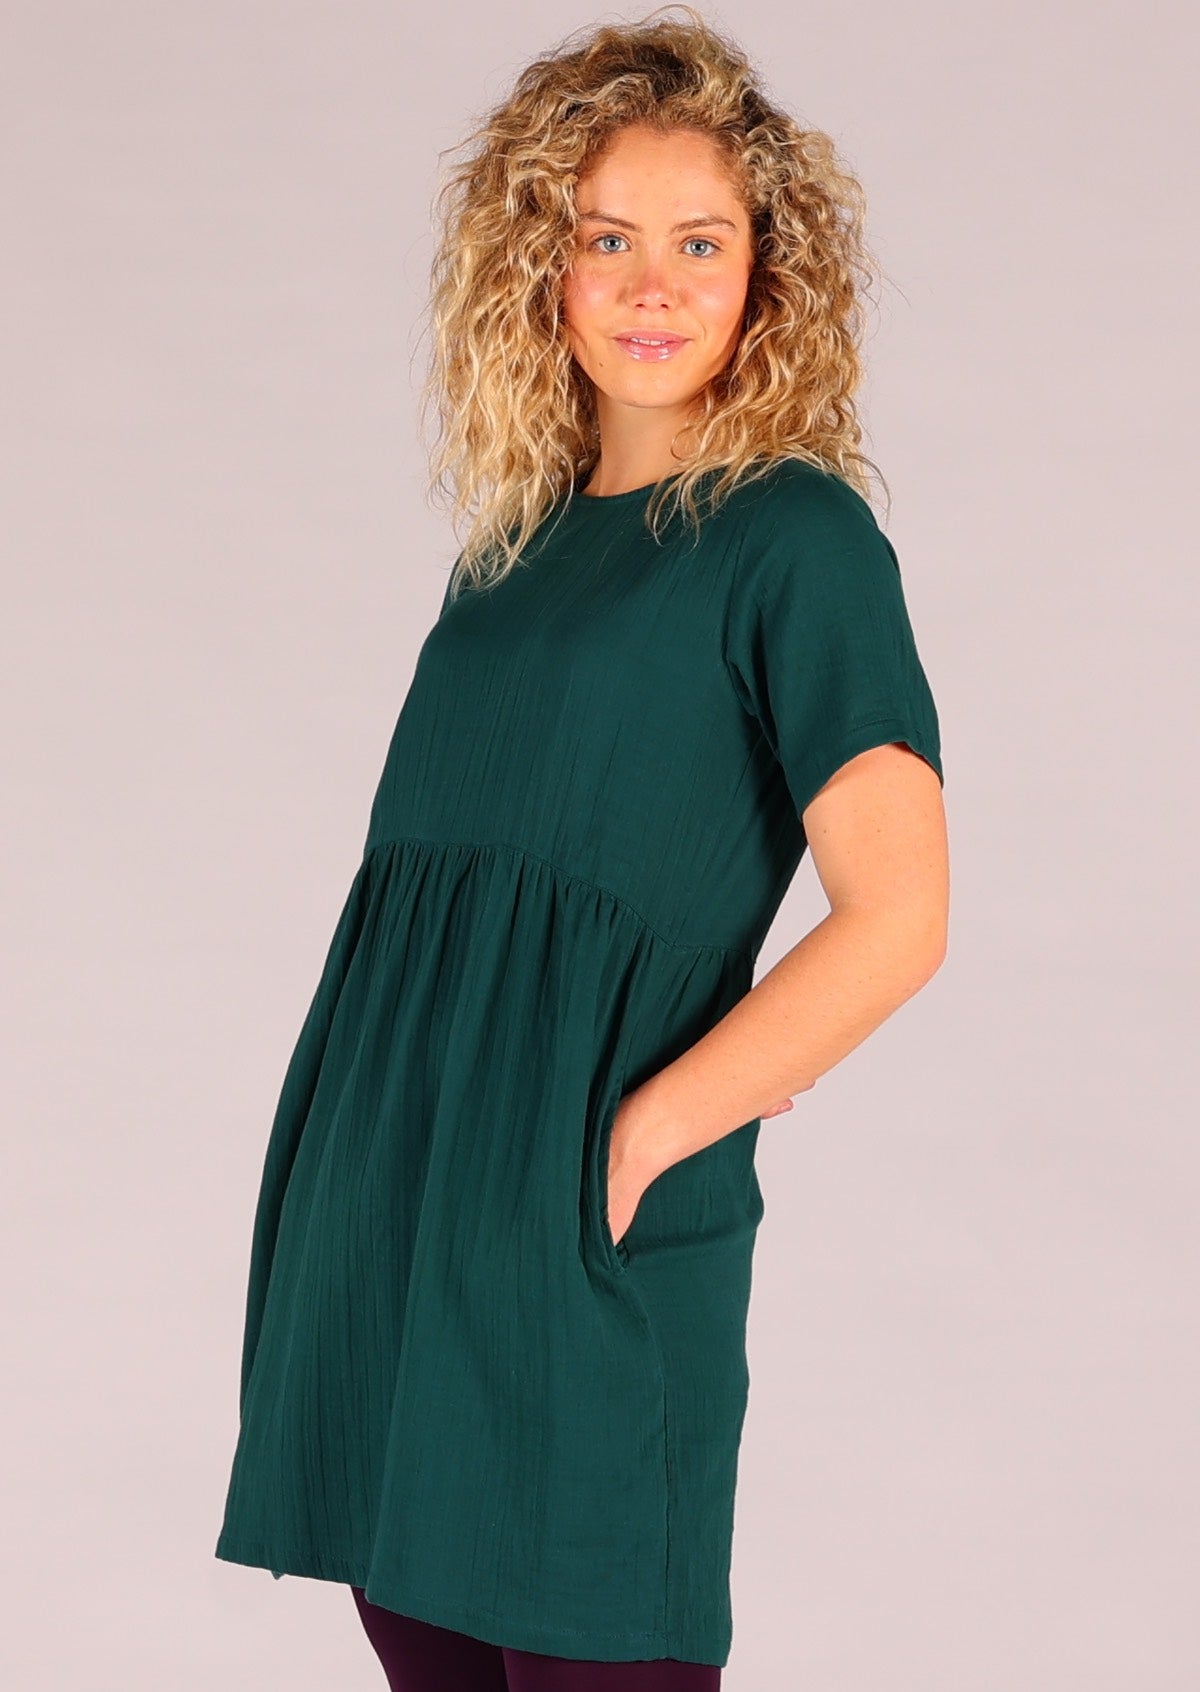 Double cotton relaxed fit dress that sits above the knee and has hidden side pockets